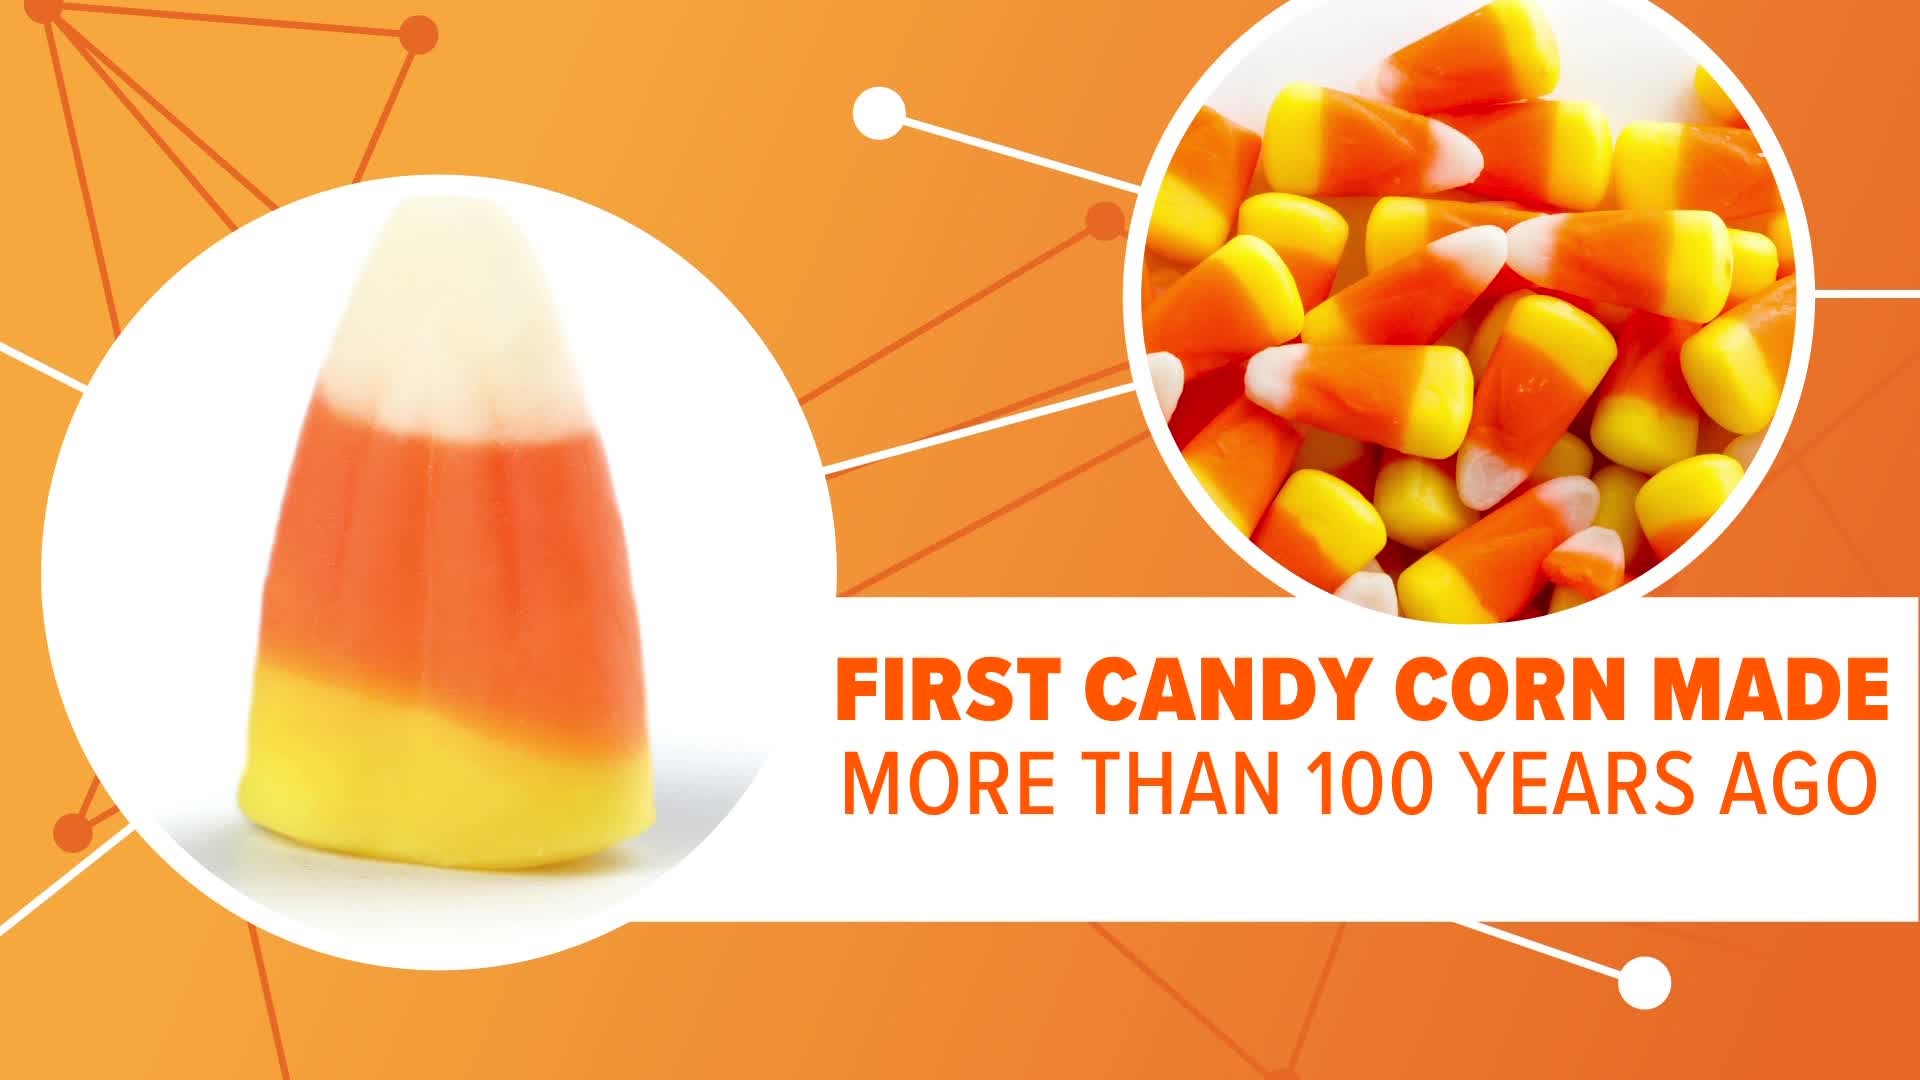 Love it or hate it, candy corn has been a fall staple for more than 100 years. So how did it become a seasonal sweet with staying power?